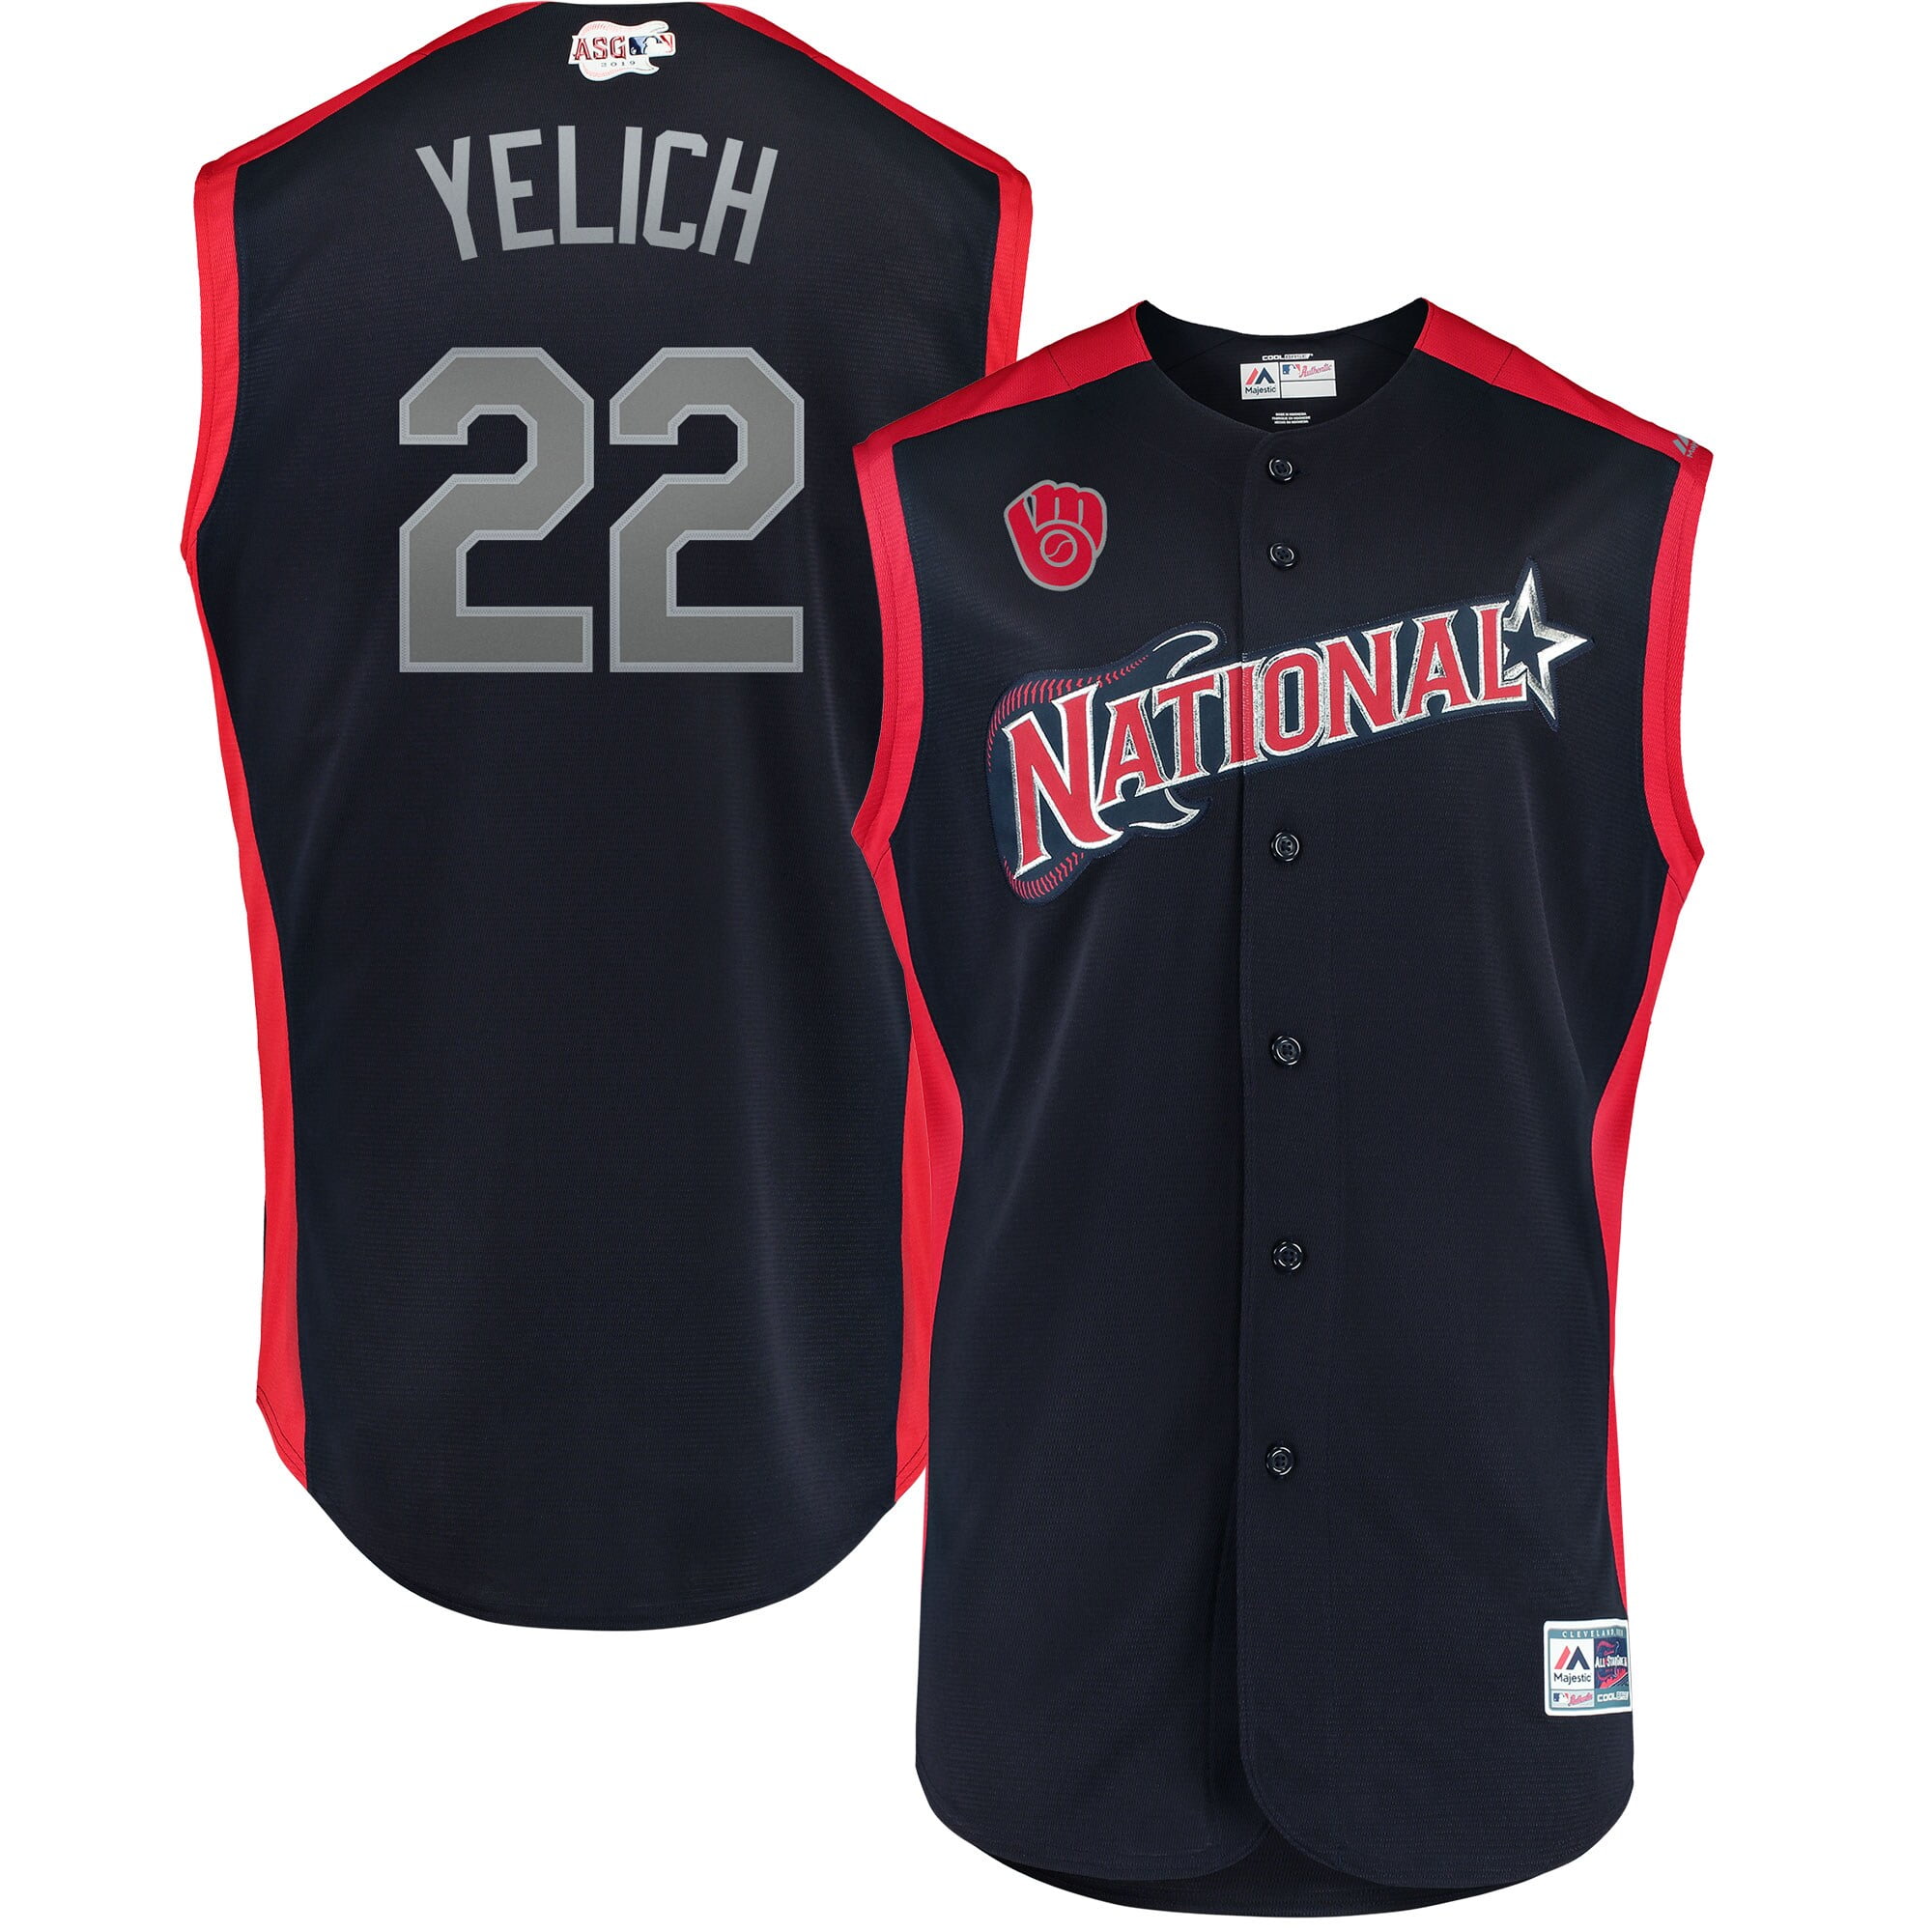 yelich all star game